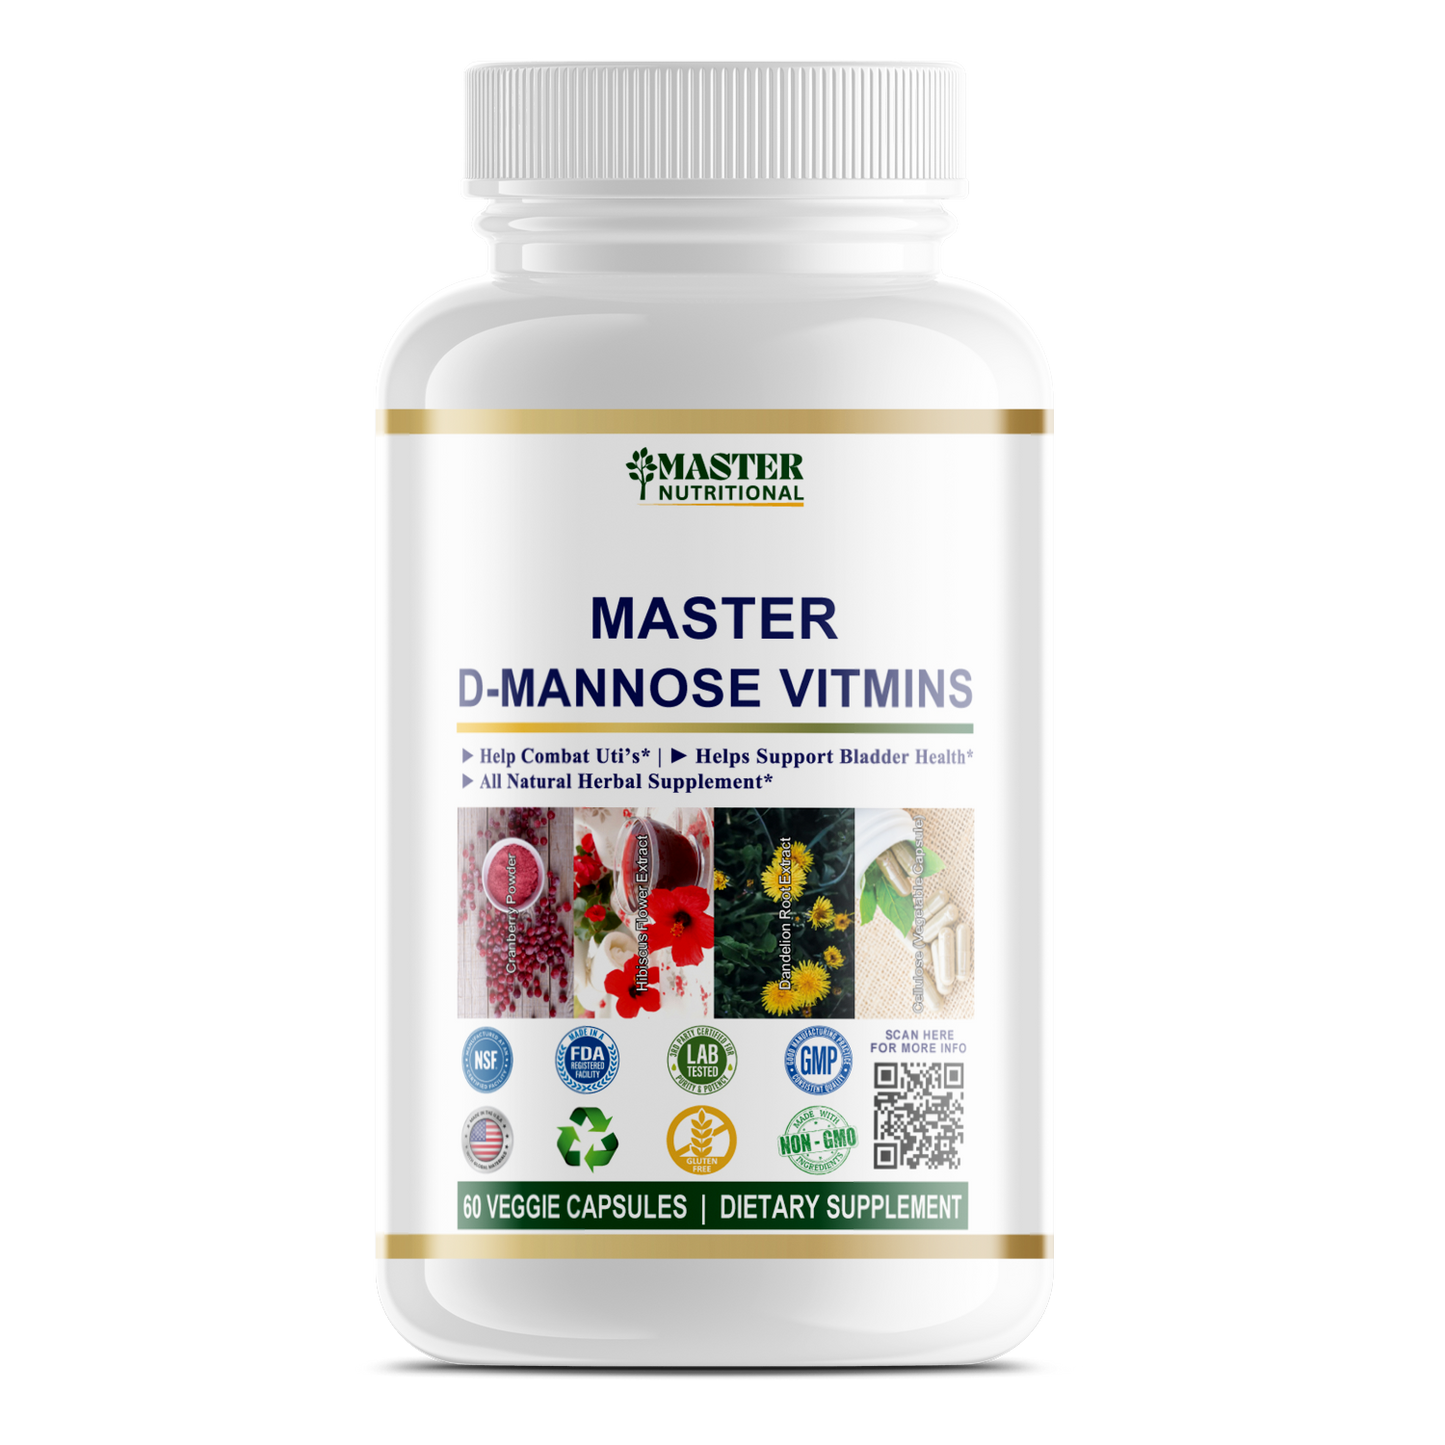 Try Master D-Mannose Vitamins for Your Journey to Urinary Health and UTI Prevention